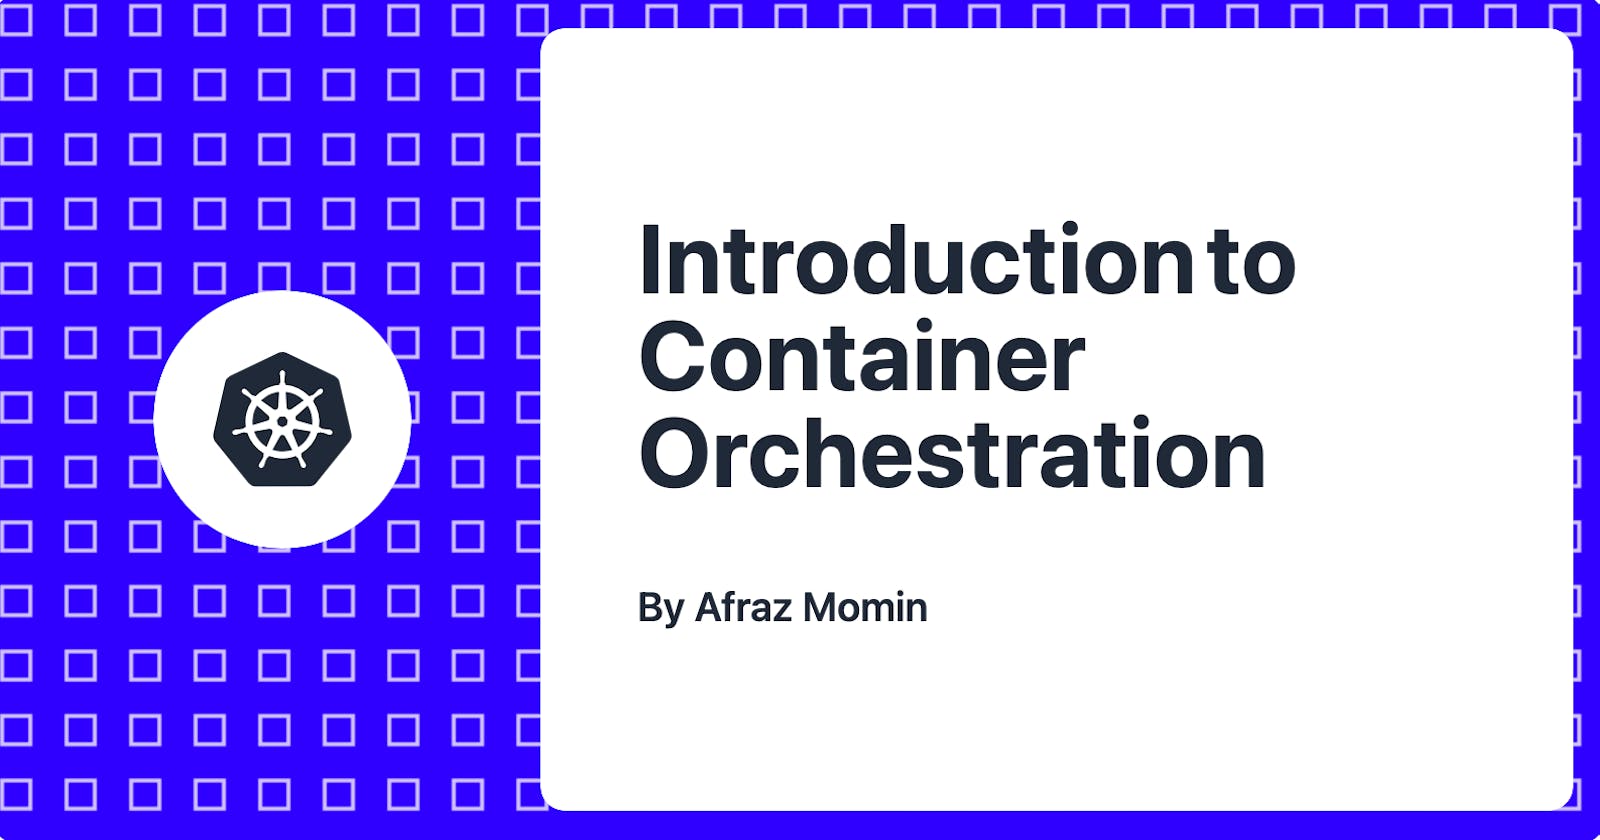 Introduction to Container Orchestration